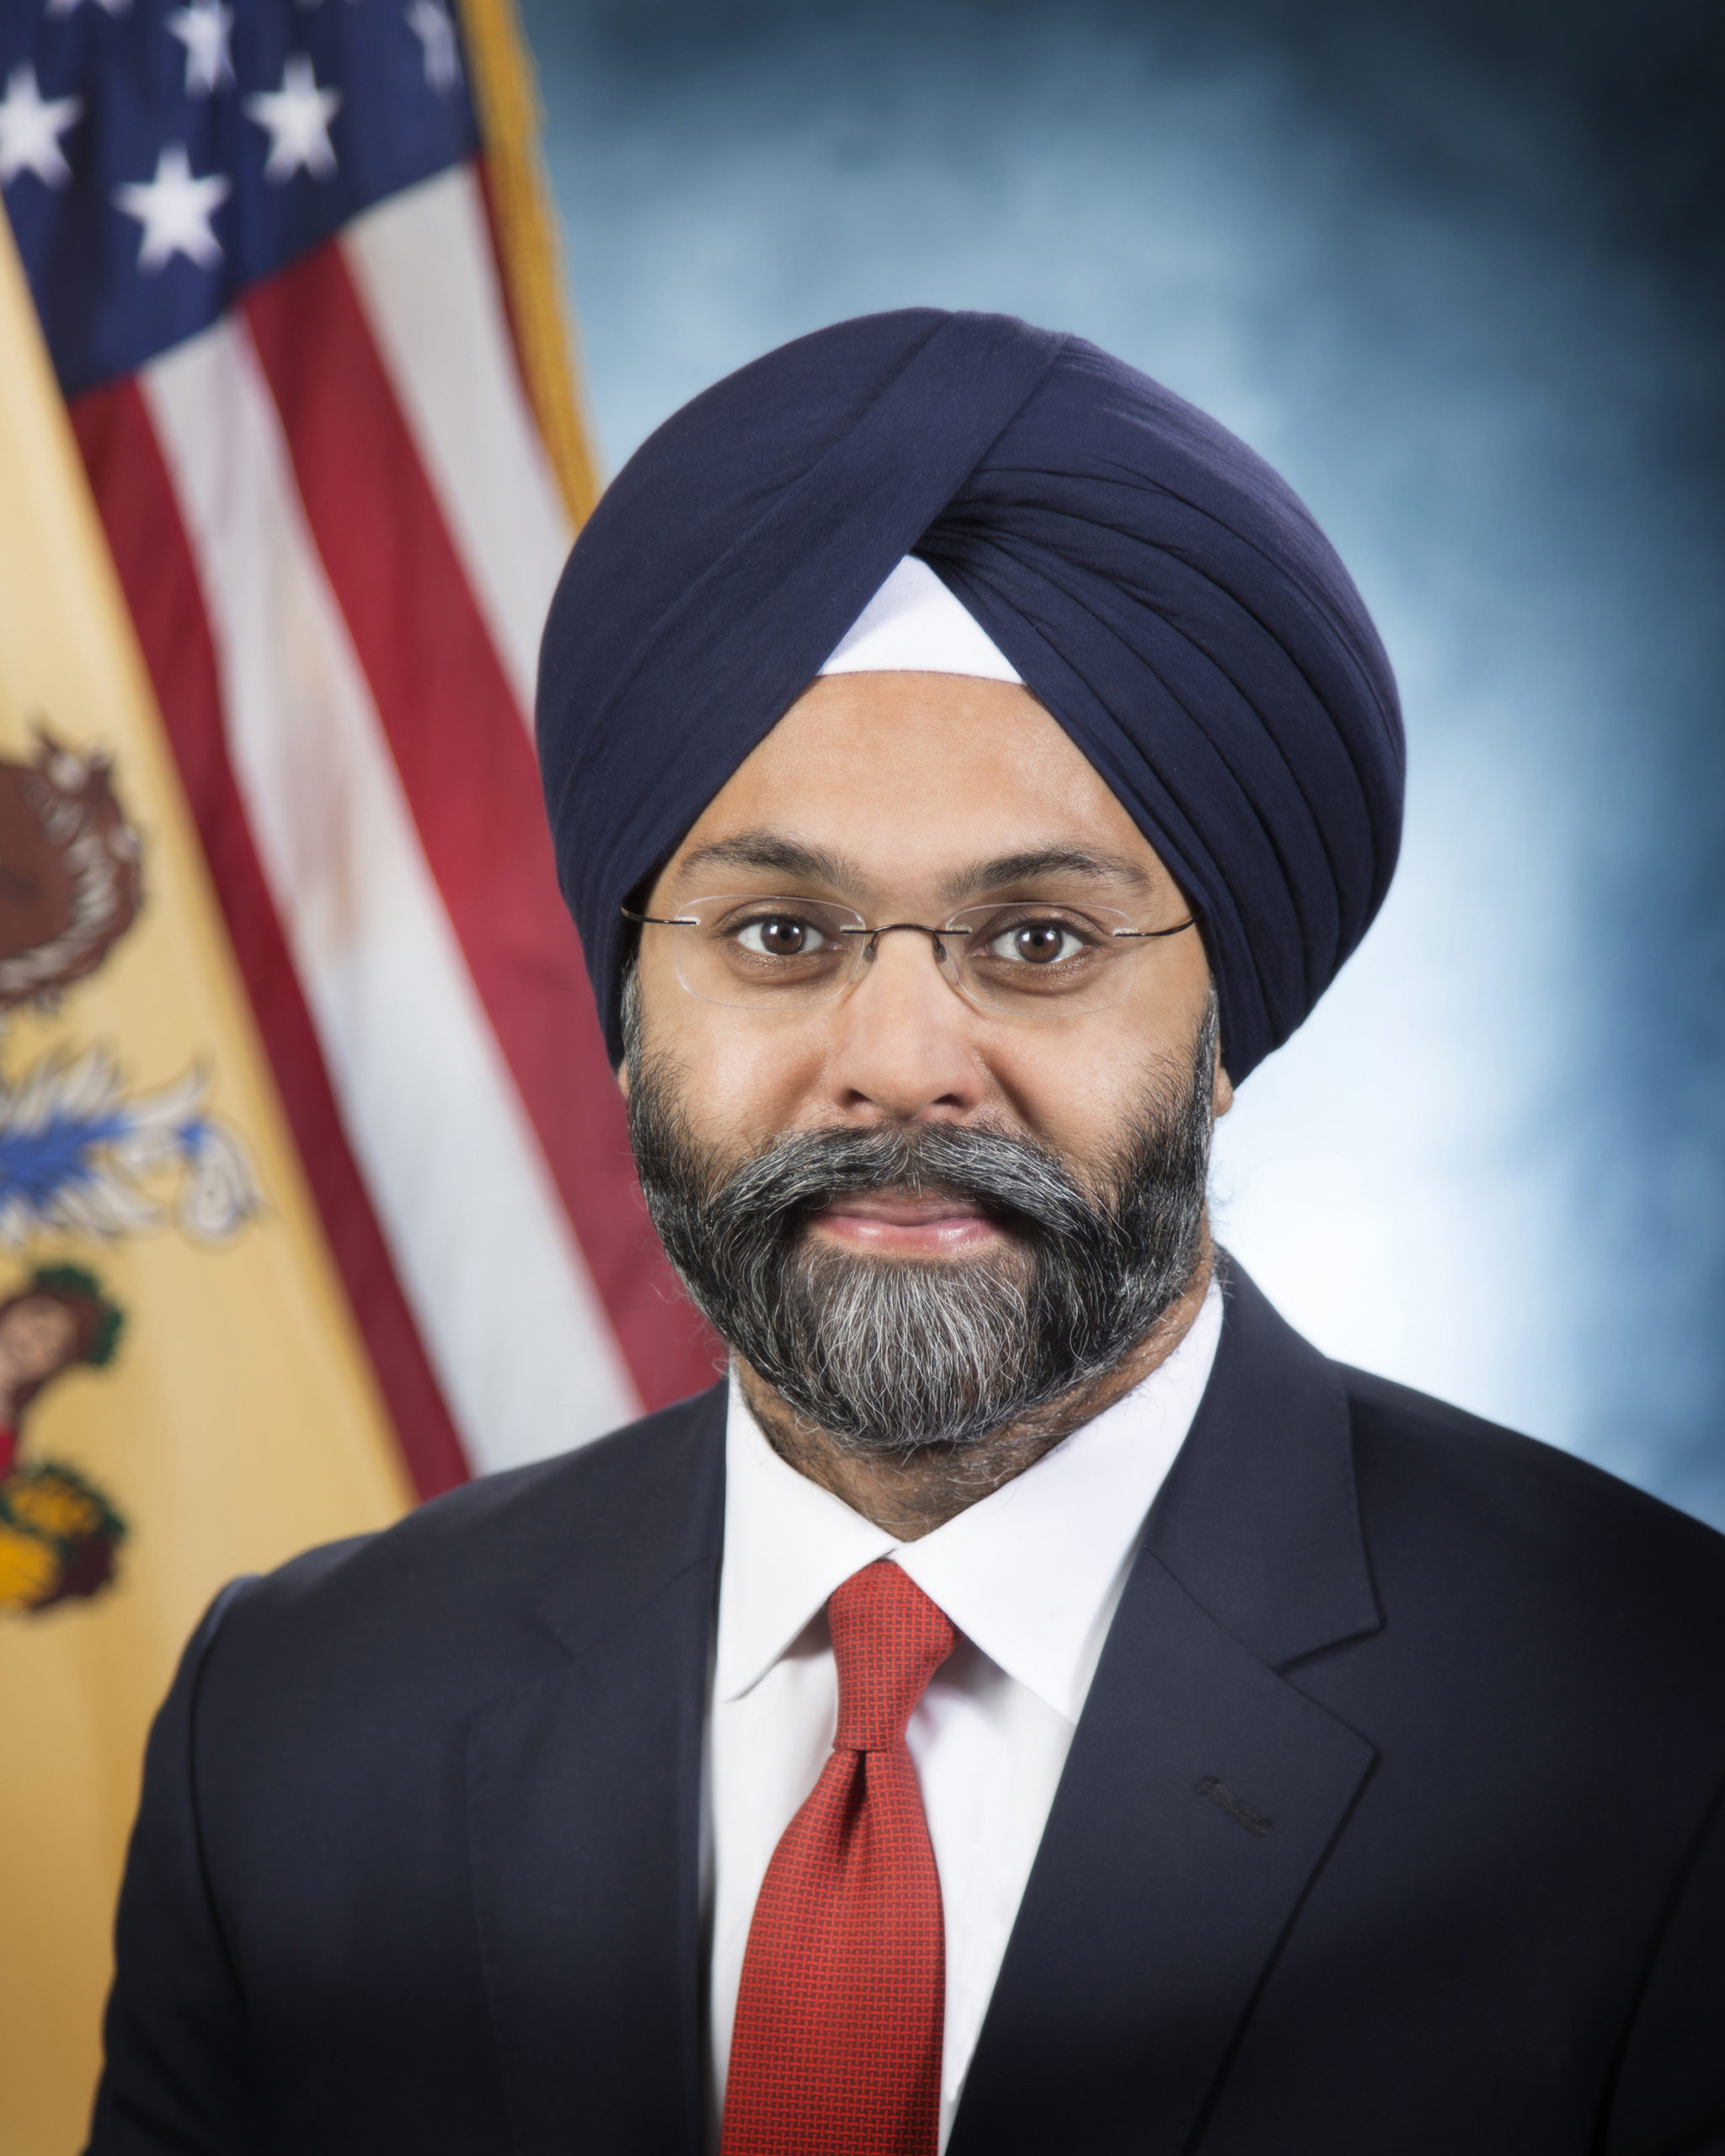 </p>
<h3 style="color:white;">Attorney General Gurbir S. Grewal</h3>
<p>Governor Philip D. Murphy announced his intention to nominate Gurbir S. Grewal to serve as New Jersey’s 61st Attorney General on December 12, 2017. He was confirmed by the New Jersey Senate and assumed the office on January 16, 2018. Since assuming office, Attorney General Grewal has focused his attention on protecting the interests of New Jersey residents by expanding affirmative litigation, strengthening police-community relations, reducing violent crime and fighting the opioid epidemic. Before becoming New Jersey Attorney General, Grewal served as Bergen County Prosecutor, the chief law enforcement officer of the most populous county in New Jersey and home to nearly 1 million residents living in 70 municipalities. As Bergen County Prosecutor, Grewal supervised a staff of 265 personnel and had supervisory authority over approximately 2,700 sworn law enforcement officers across 74 law enforcement agencies. Among other accomplishments during his tenure, he developed and implemented several creative approaches designed to tackle the heroin and opioid crisis, including “Operation Helping Hand,” a program that offers low-level drug offenders treatment options upon arrest. He also established a Community Affairs Unit, which is dedicated to assisting local departments improve police/community relations.</p>
<p>